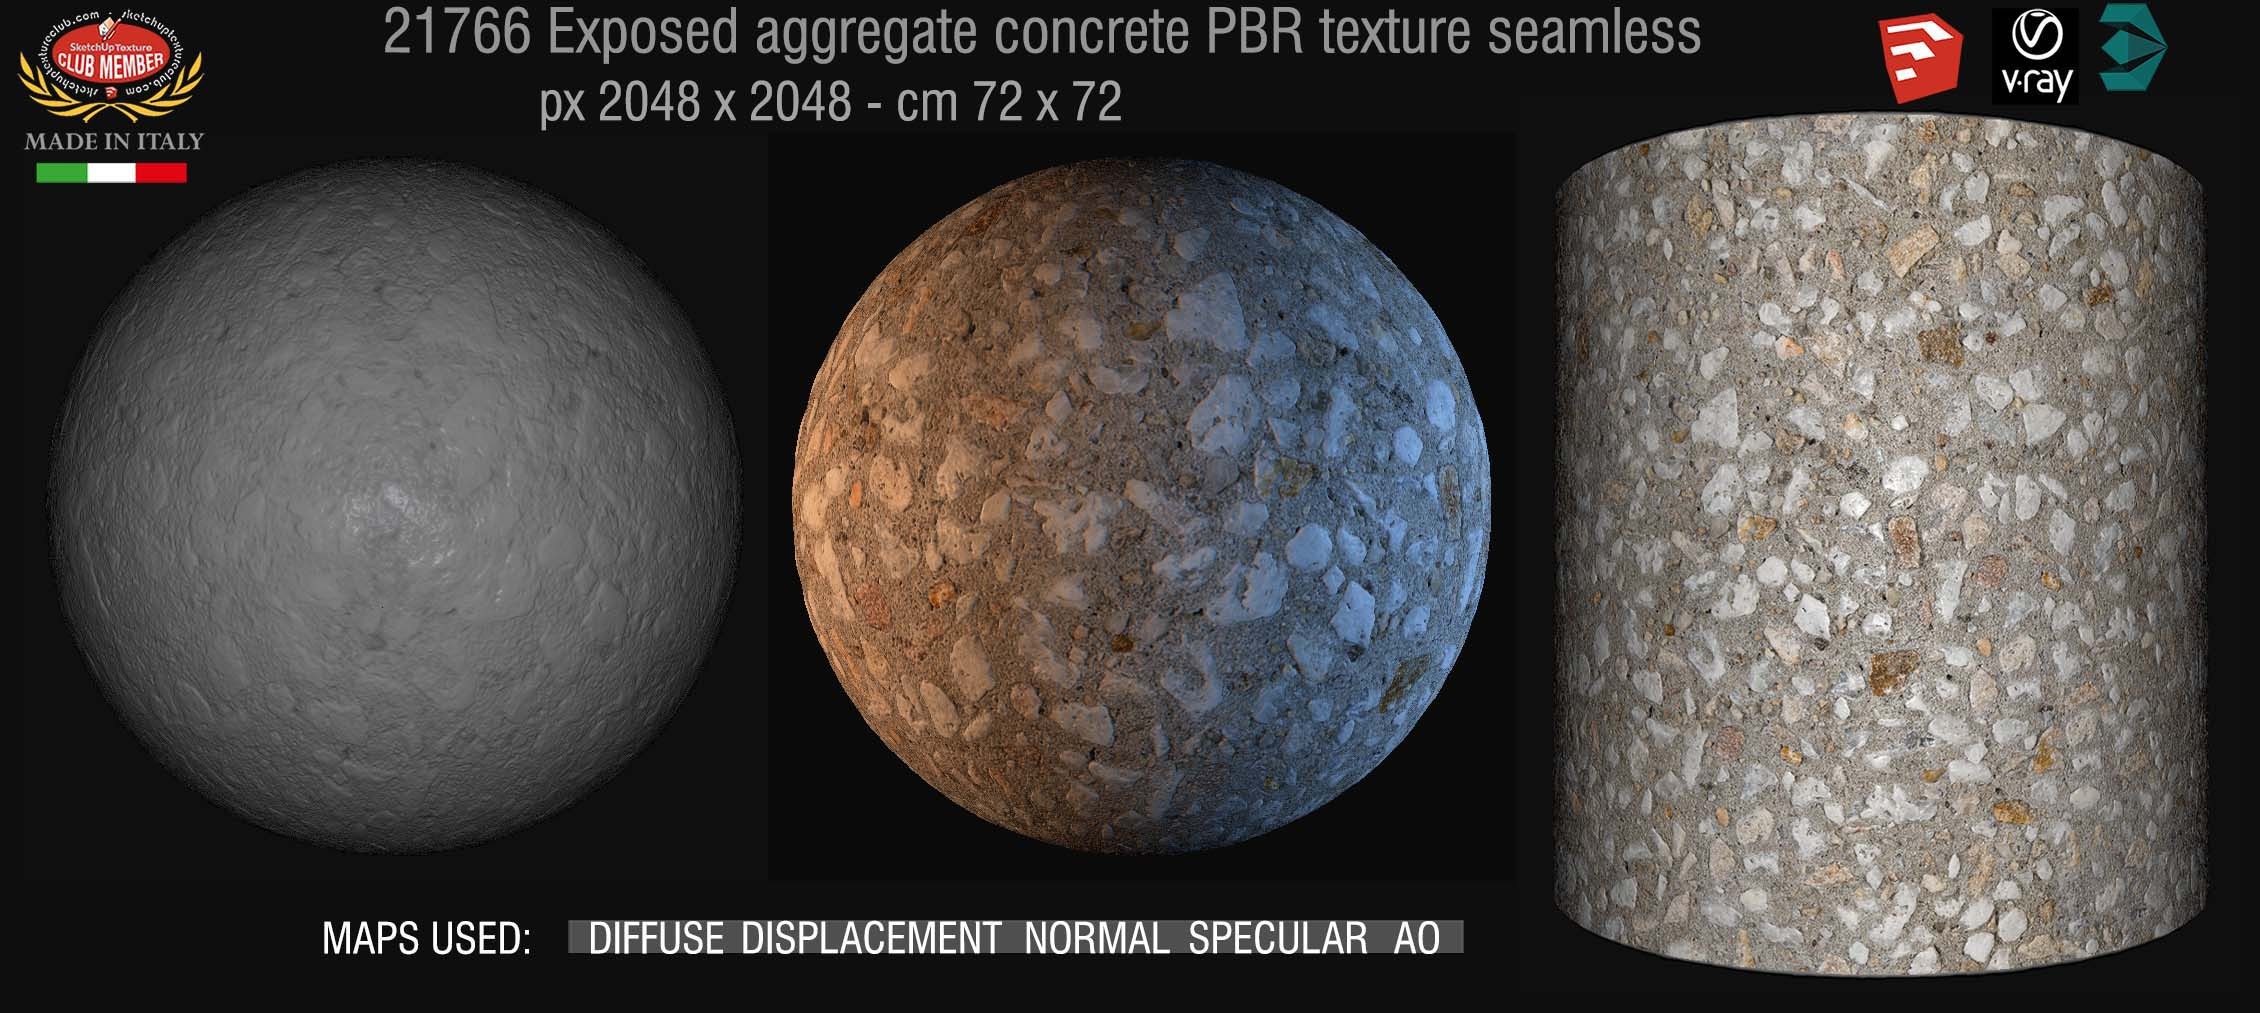 21766 Exposed aggregate concrete PBR textures seamless DEMO